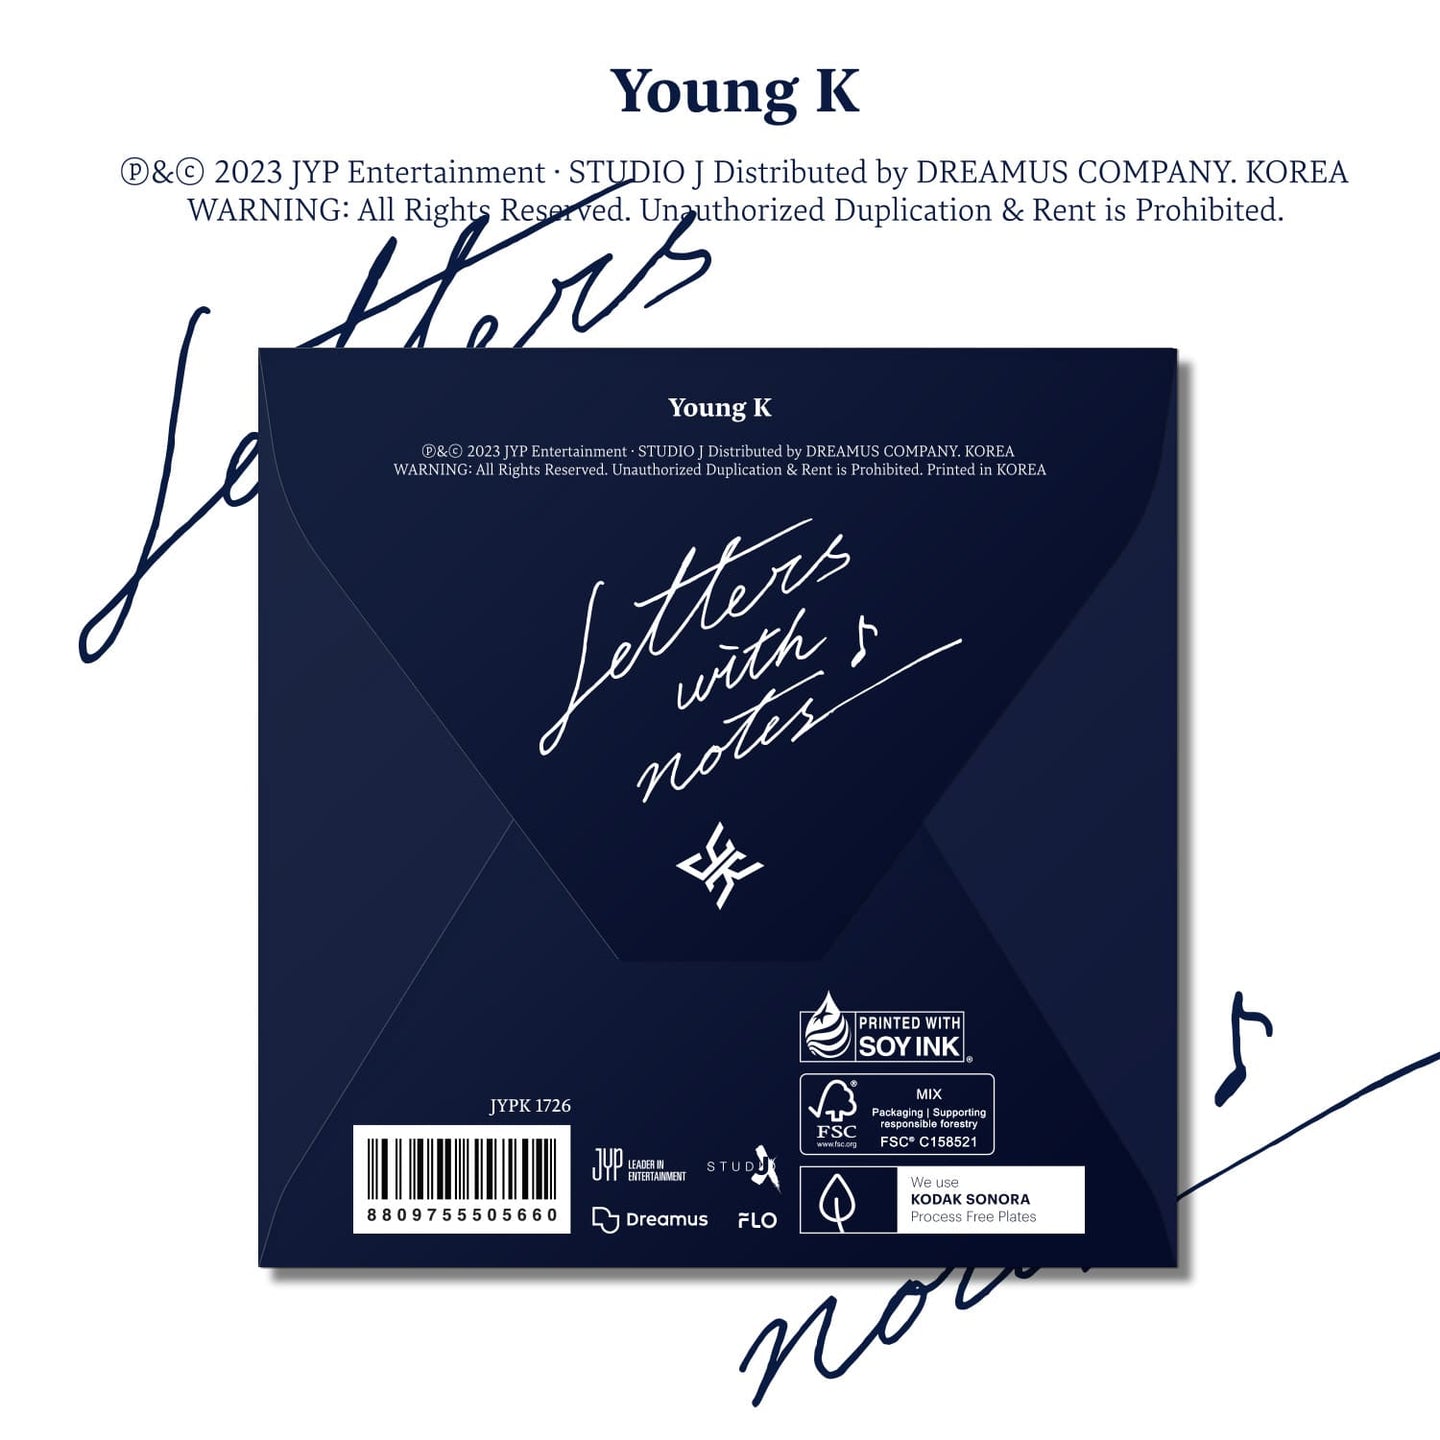 Young K – Letters with notes (Digipack Ver.)